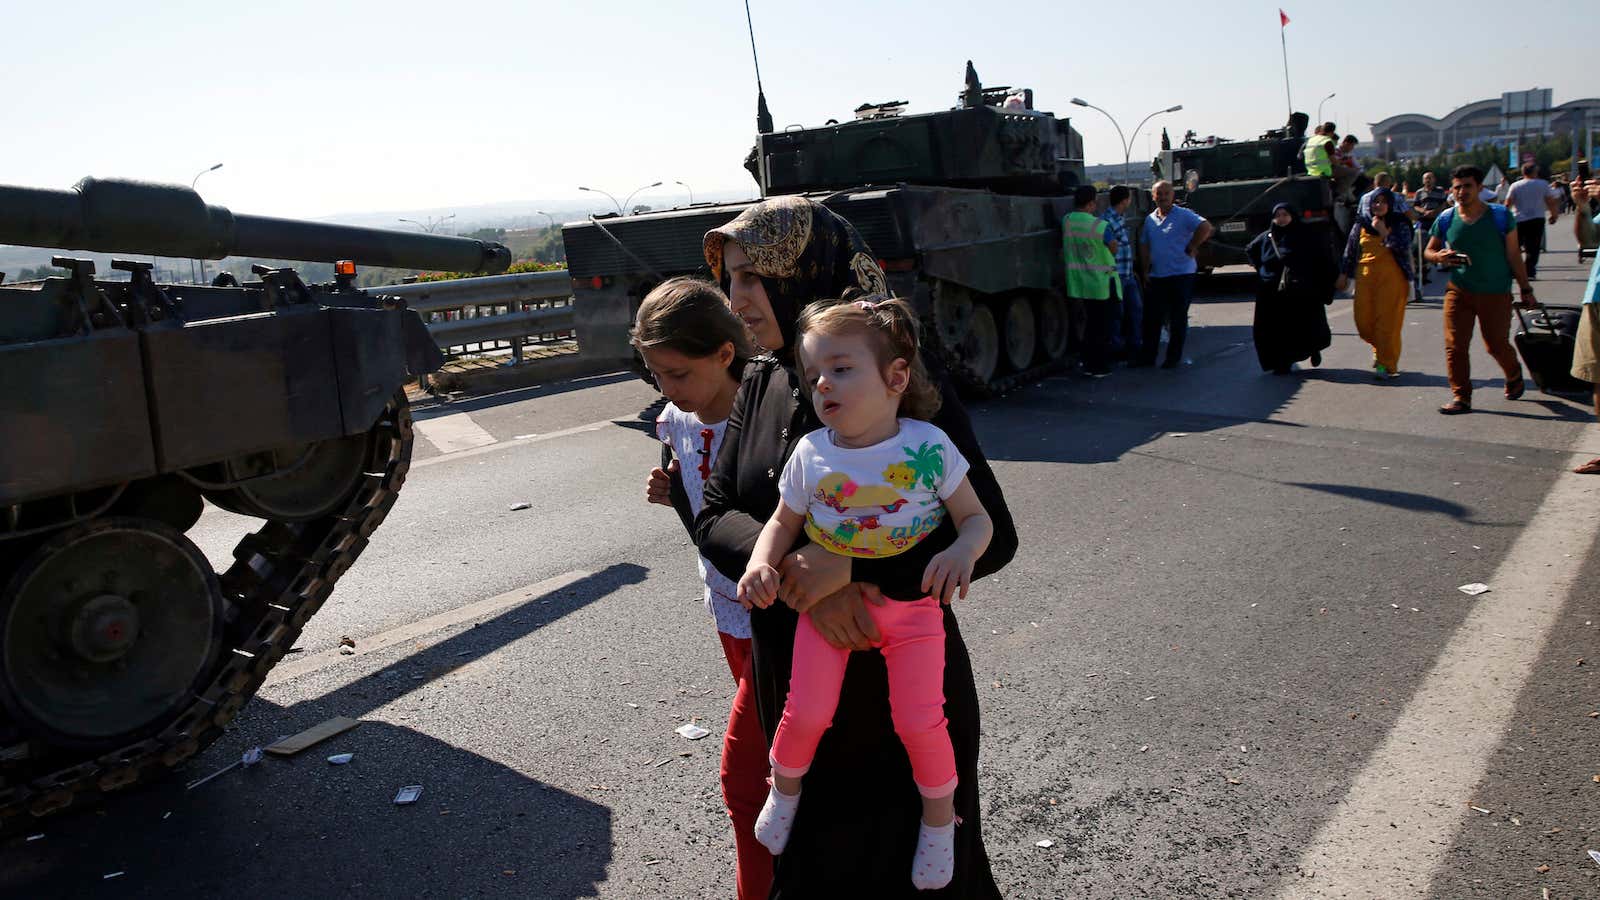 A woman with two girls walks past military vehicles in Istanbul the day after the attempted coup.